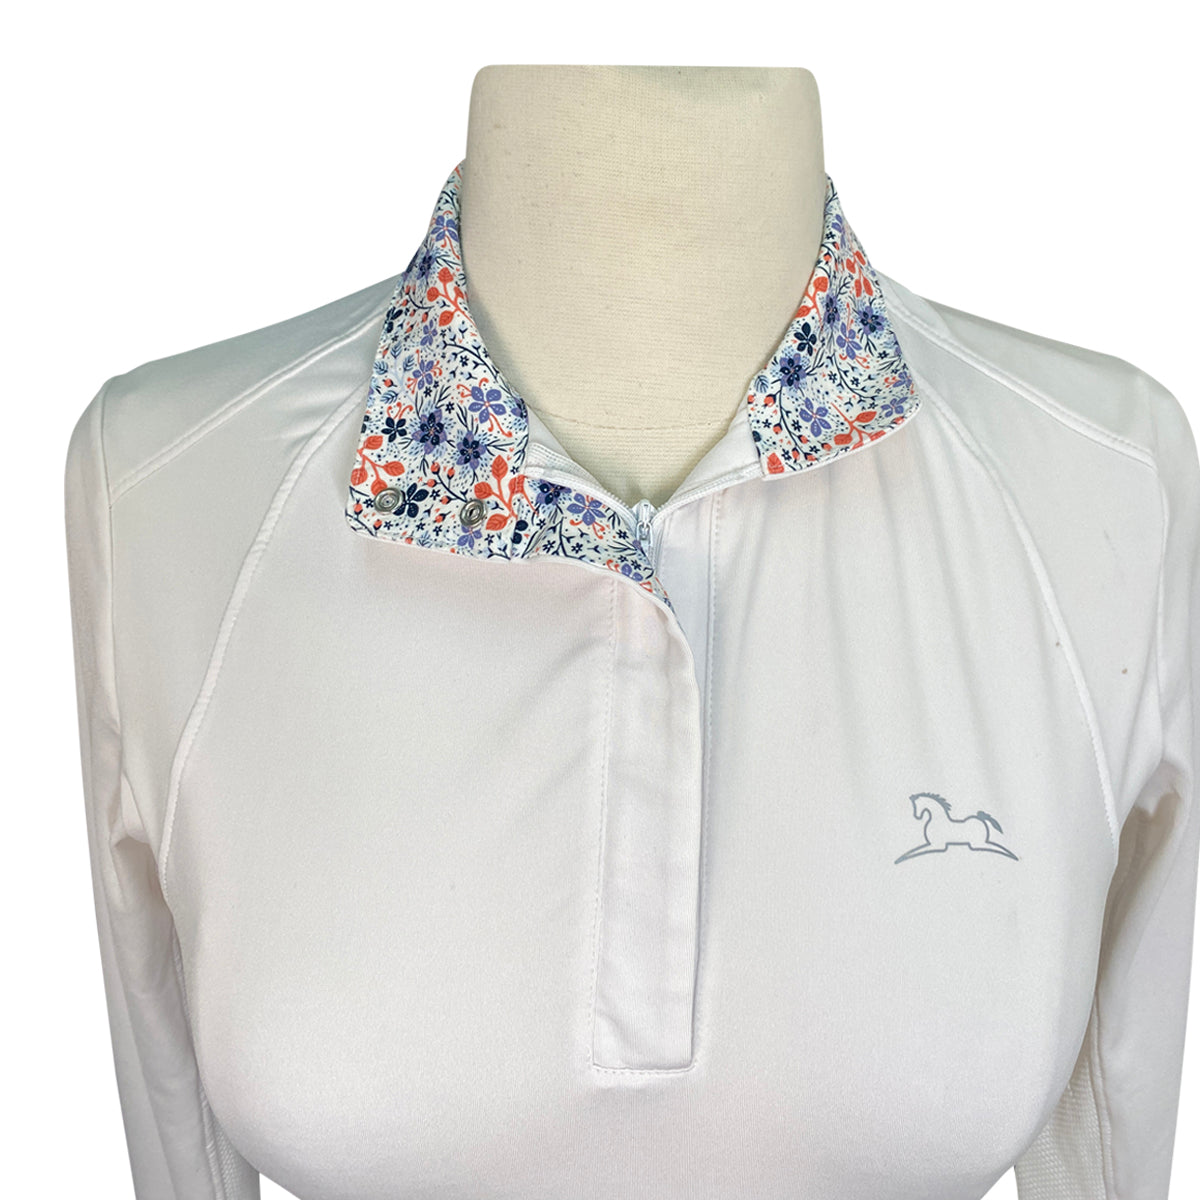 R.J. Classics 'Maddie' Show Shirt in White w/Floral Pattern